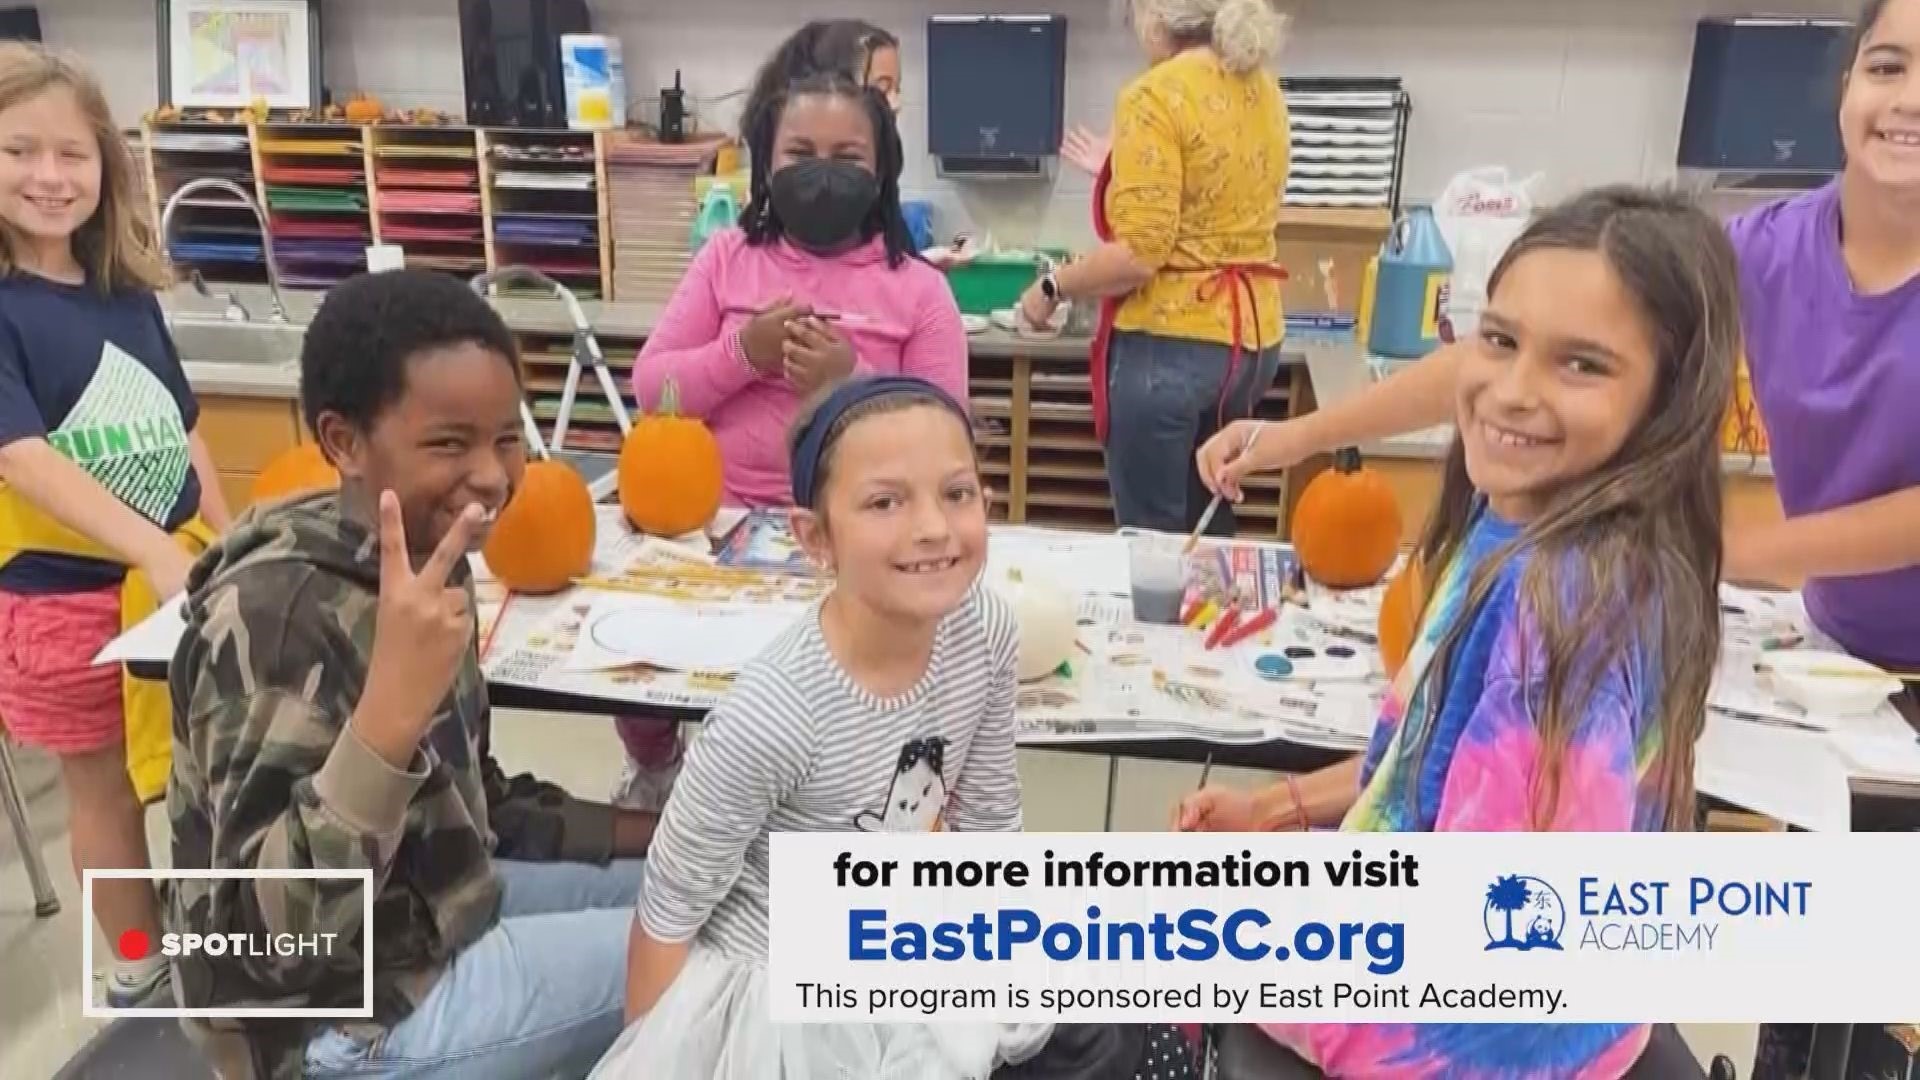 East Point Academy is a tuition free public charter school that serves 5k-8th grade in West Columbia, SC.